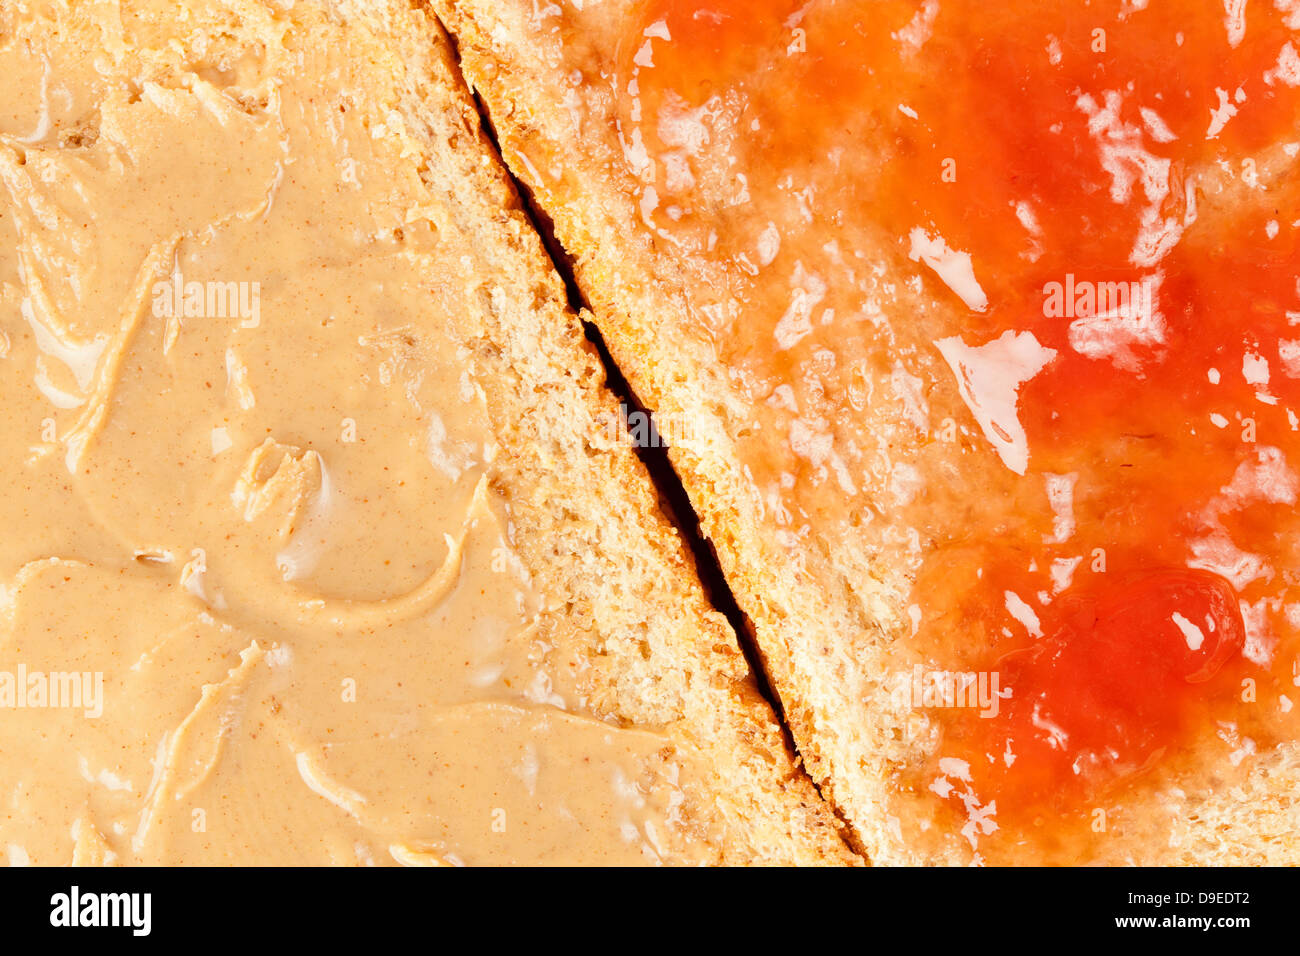 Homemade Peanut Butter and Jelly Sandwich against a background Stock Photo